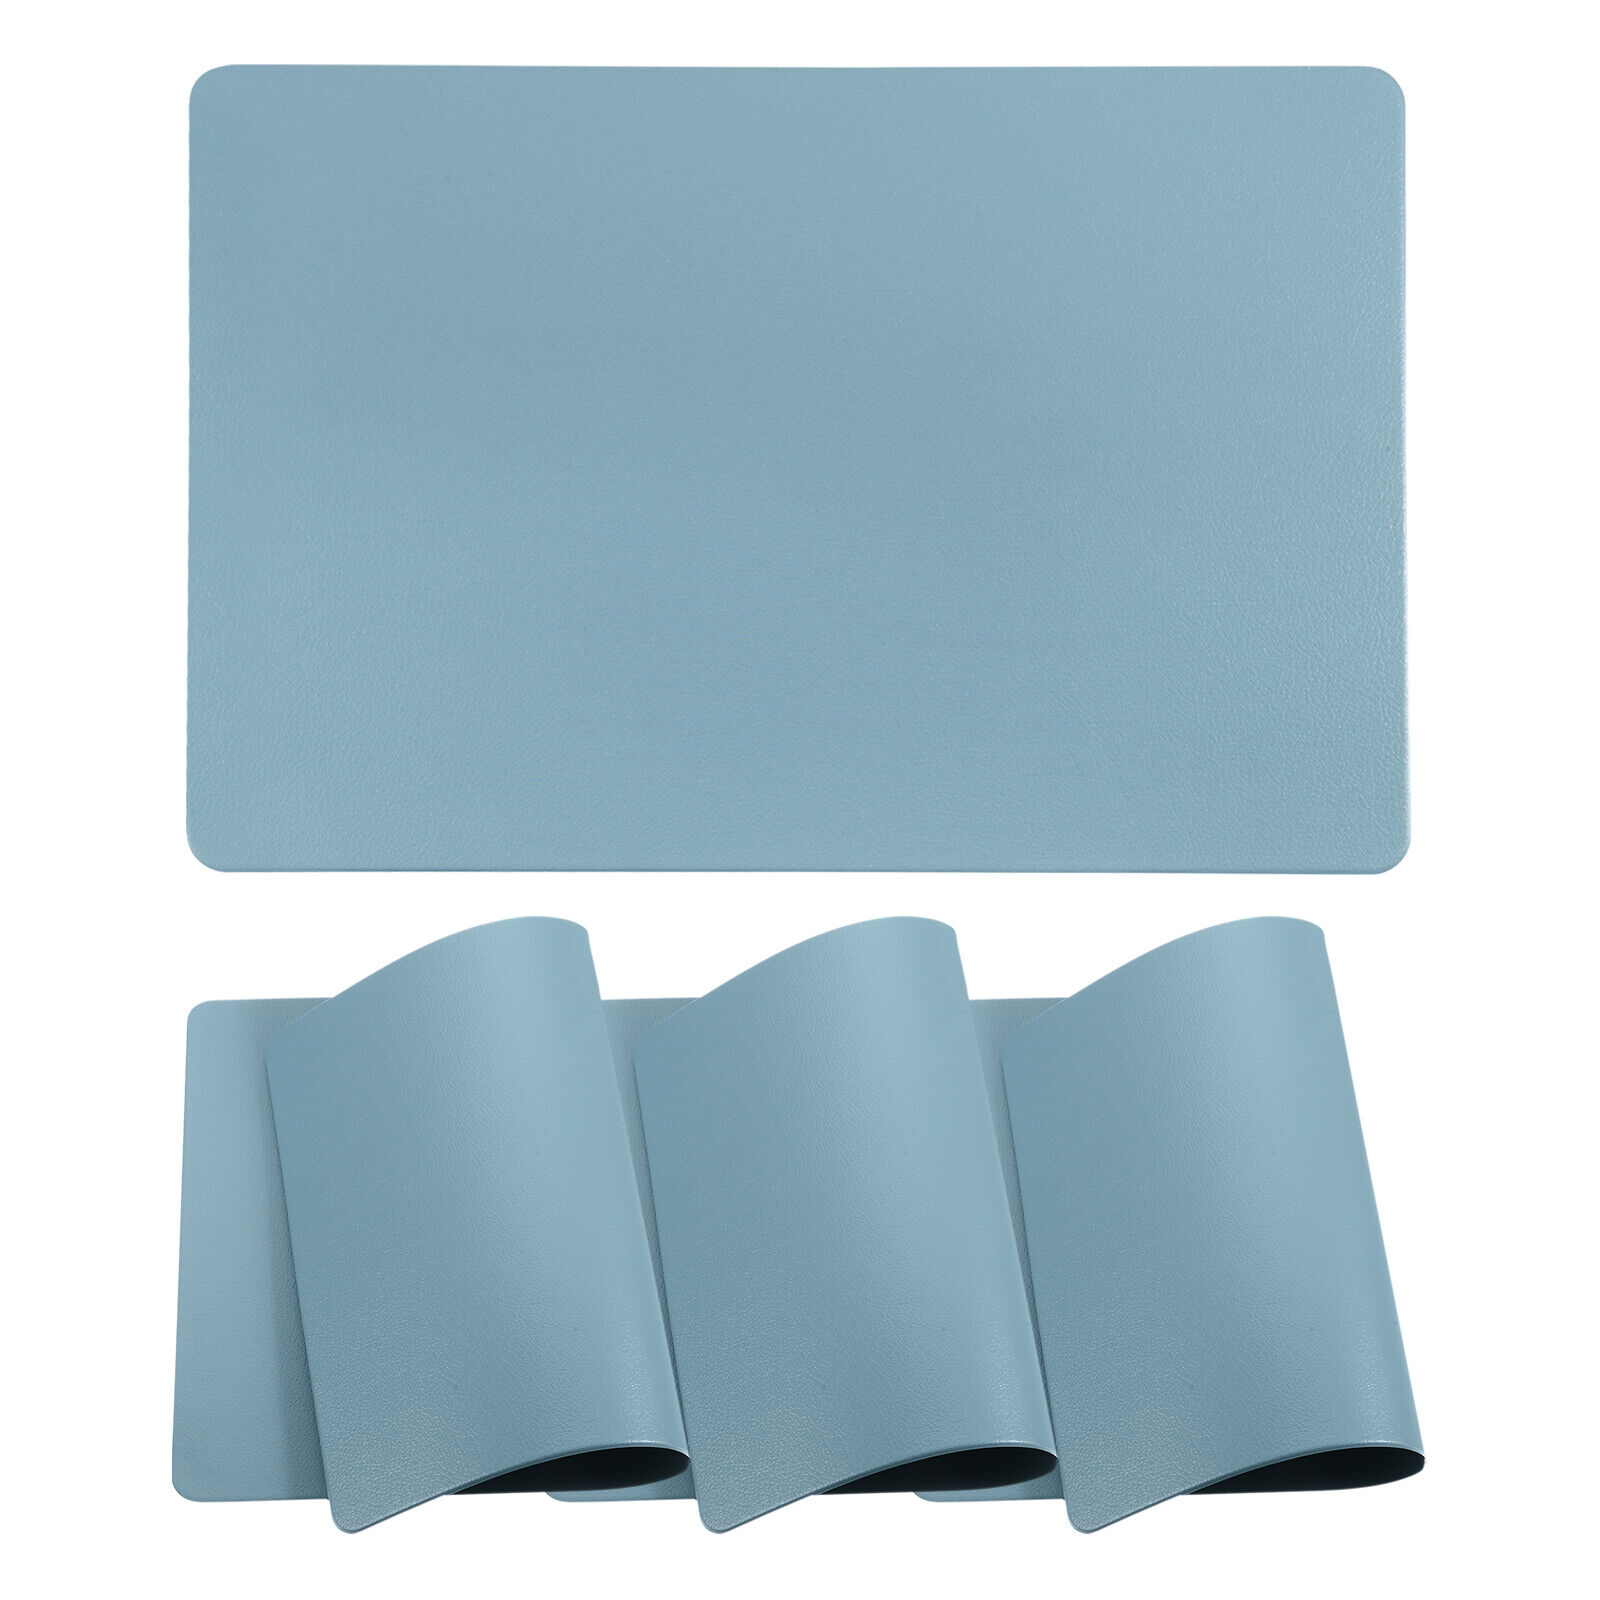 Placemats Set of 4, 12 x 18 Inch PVC Heat Resistant Table Mats for Table (Blue)